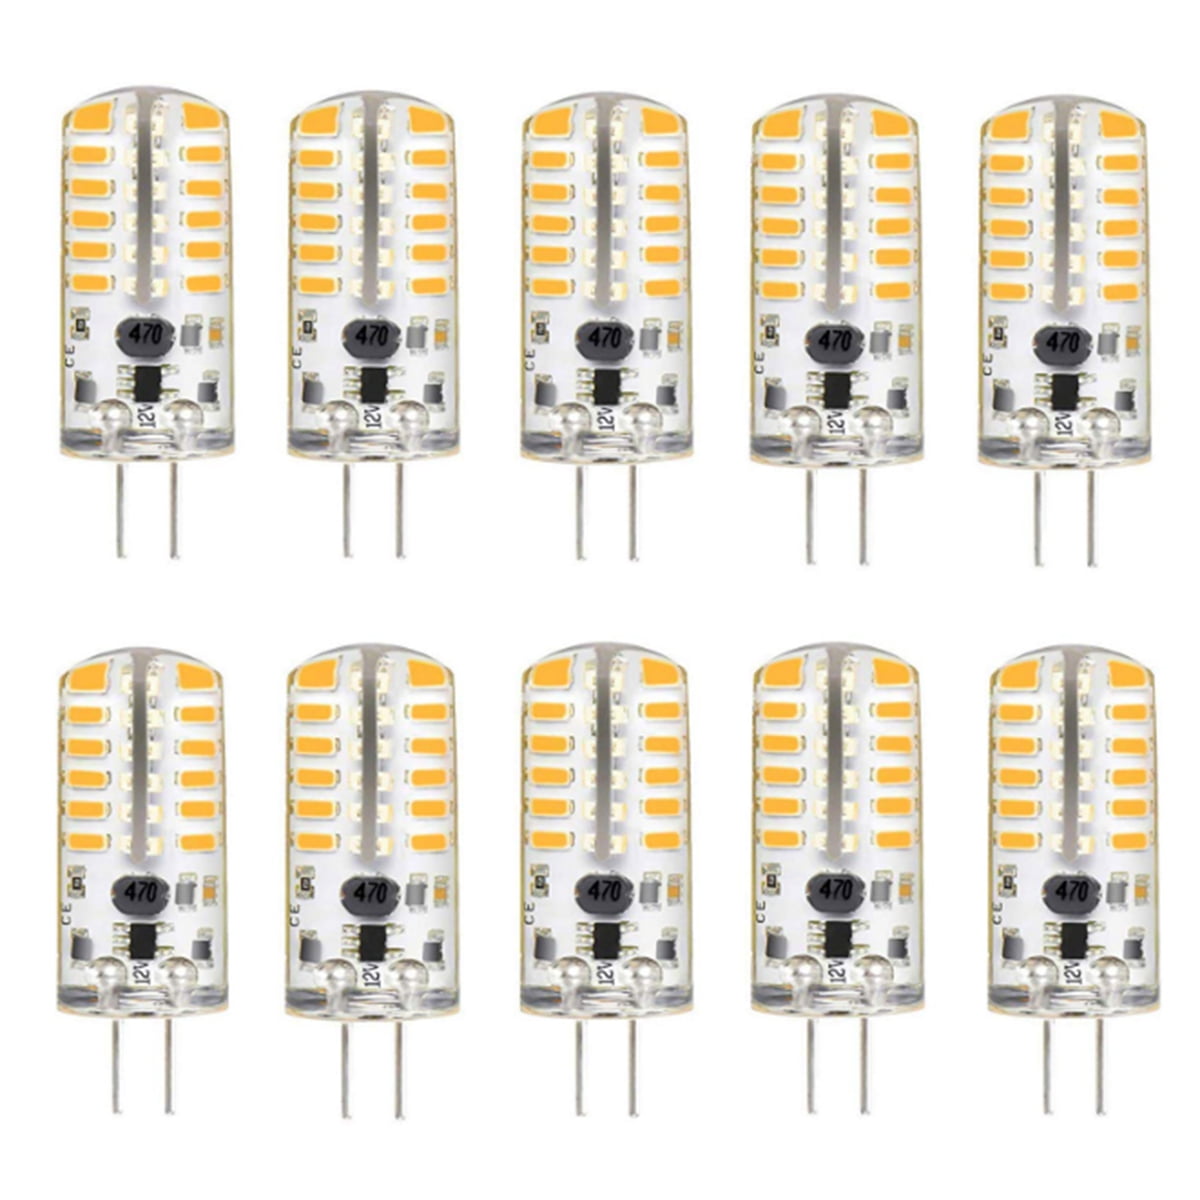 Dimmable G4 LED Bulb Lamp 12V AC/DC 220V COB Light 7W Replace 45W Halogen Lamps 